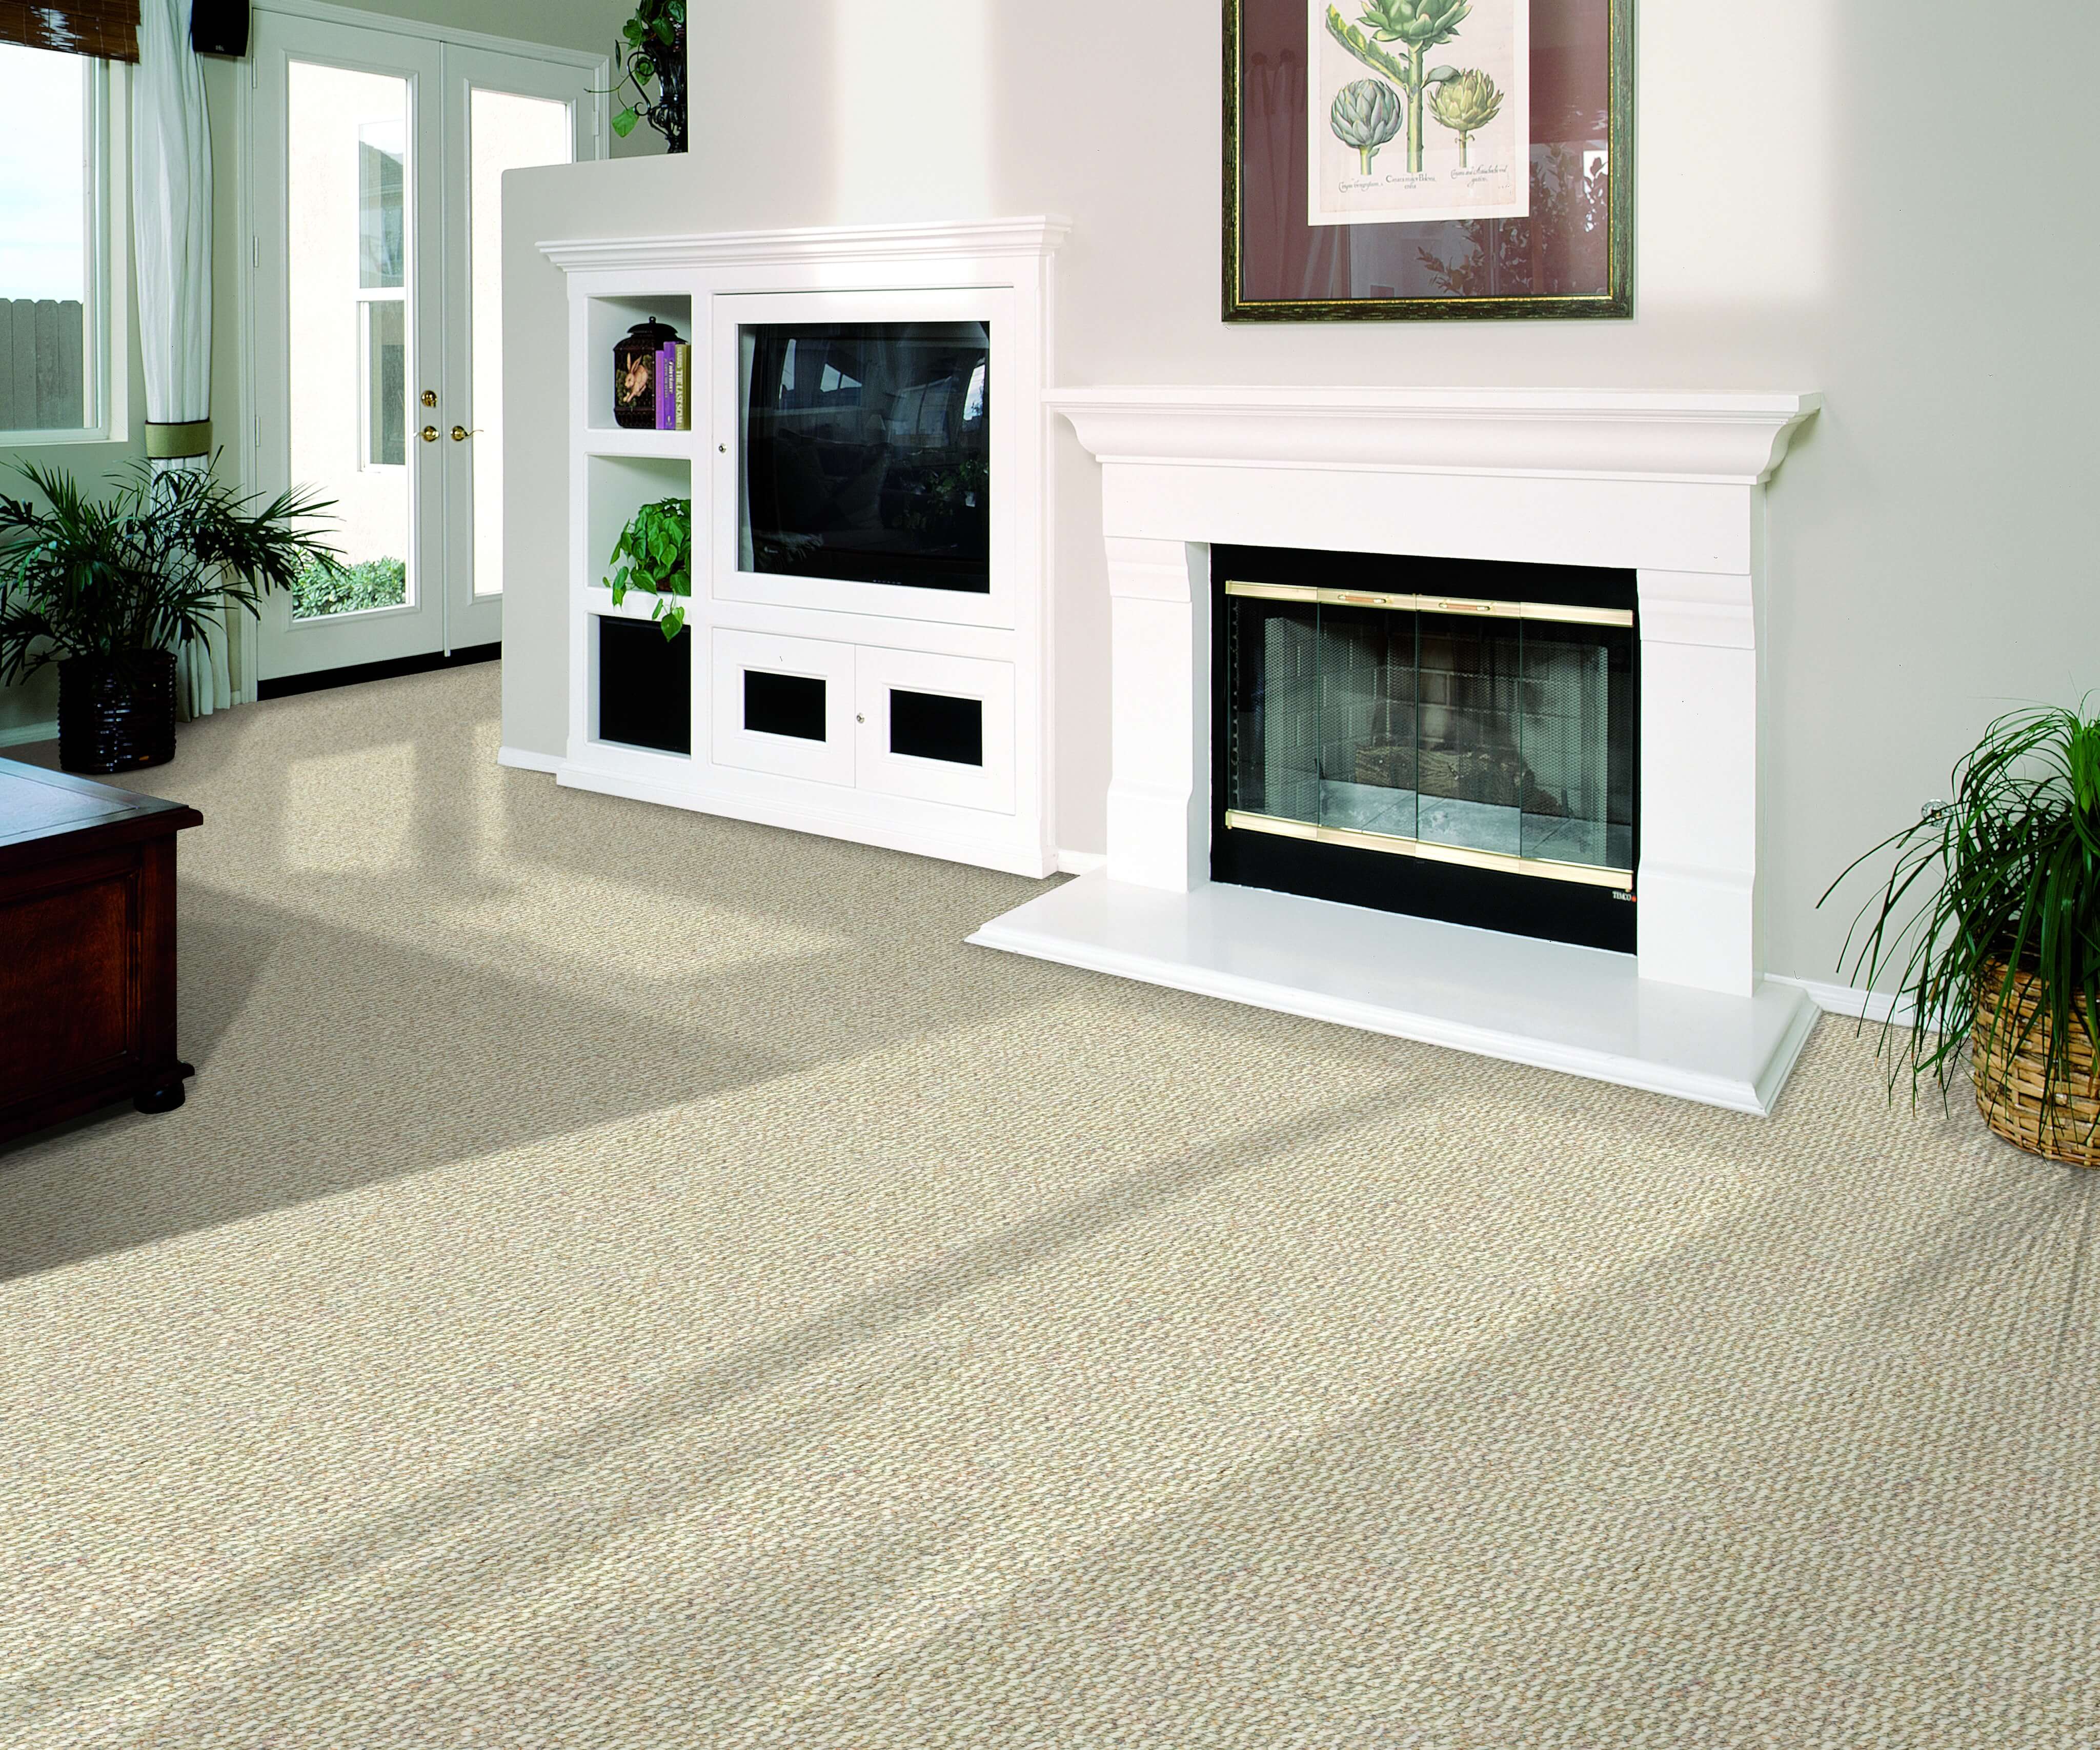 How Carpet Flooring Can Help Lower Your Heating Bills